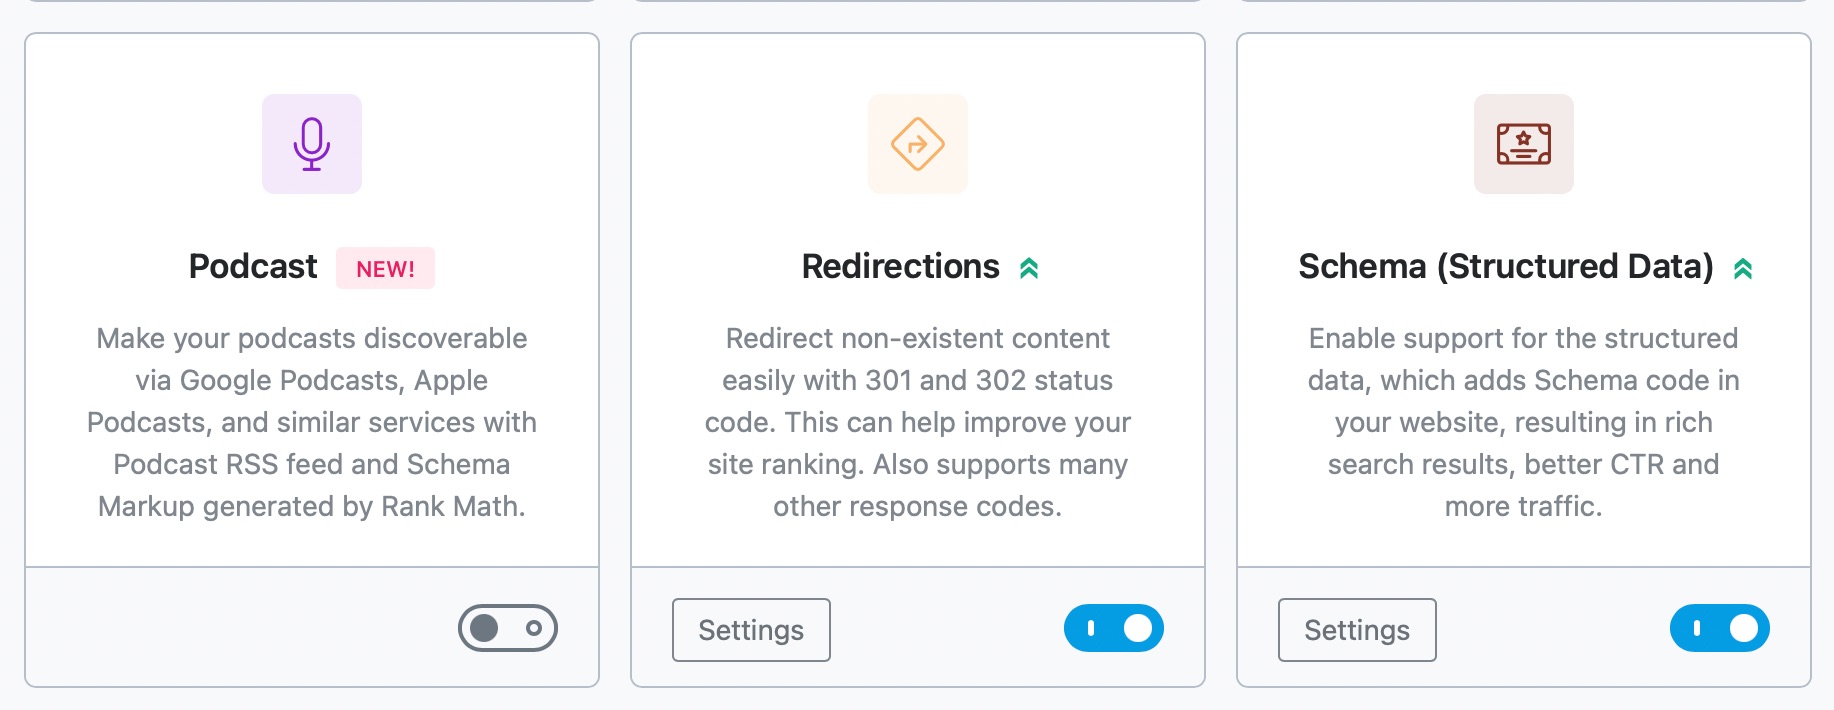 Activate Redirections module